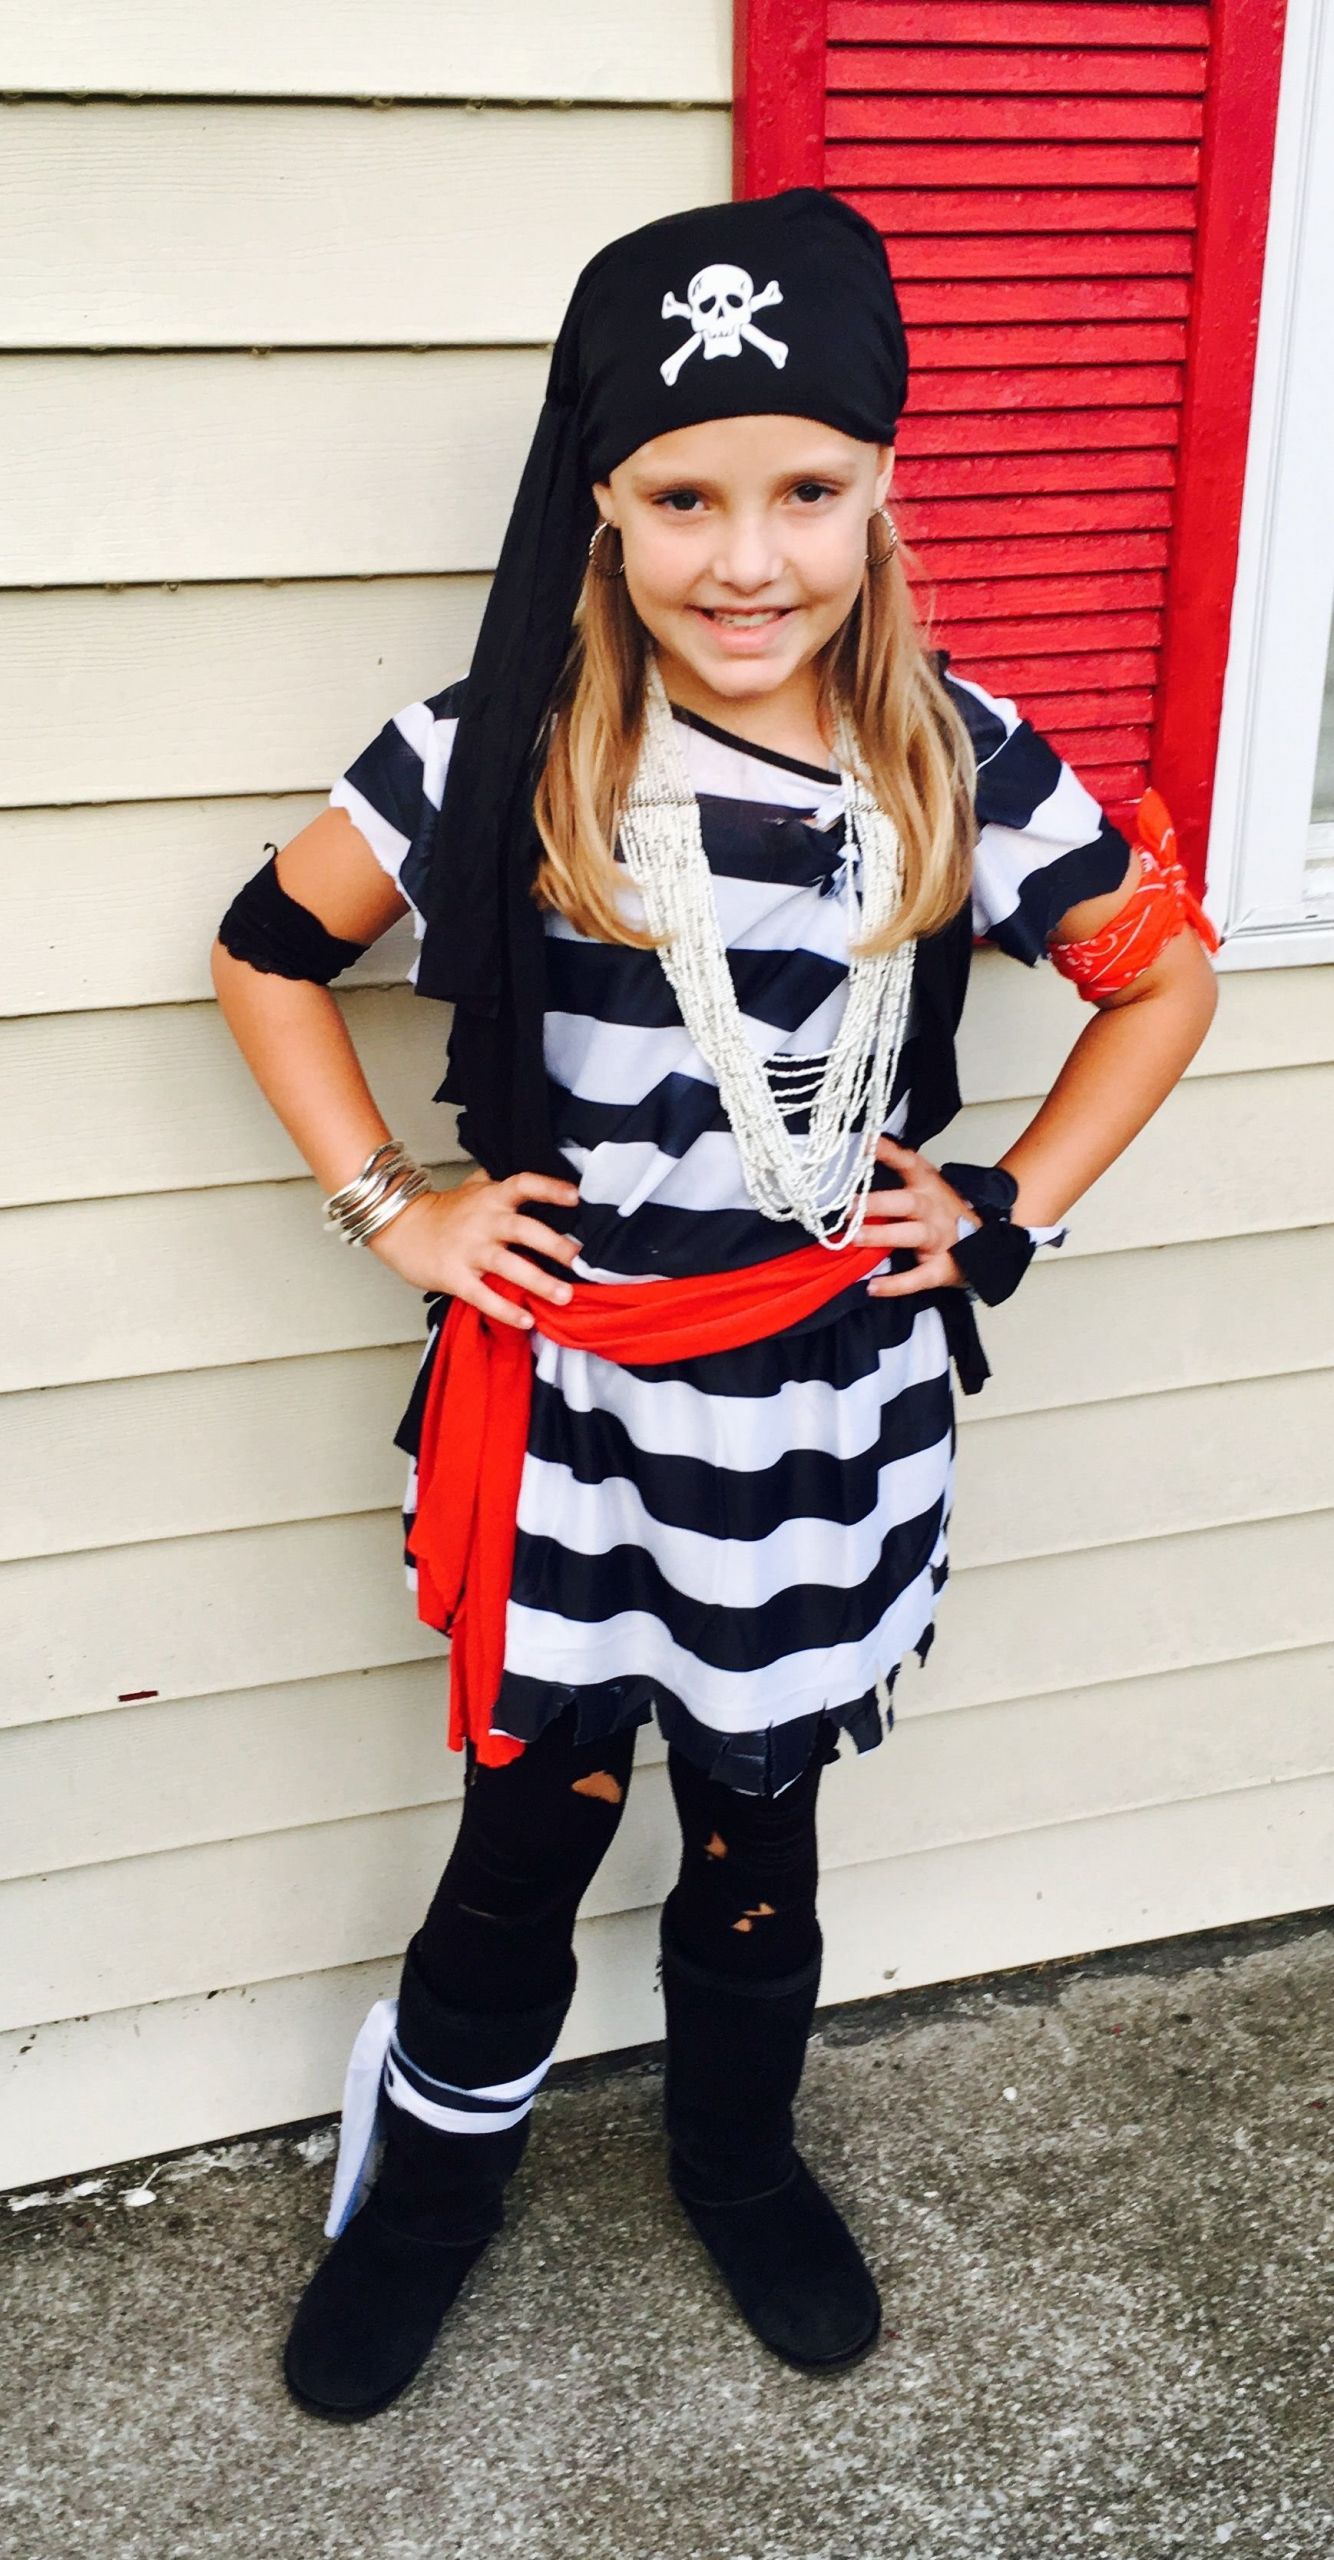 DIY Kid Pirate Costume
 10 Attractive Homemade Pirate Costume Ideas For Kids 2019